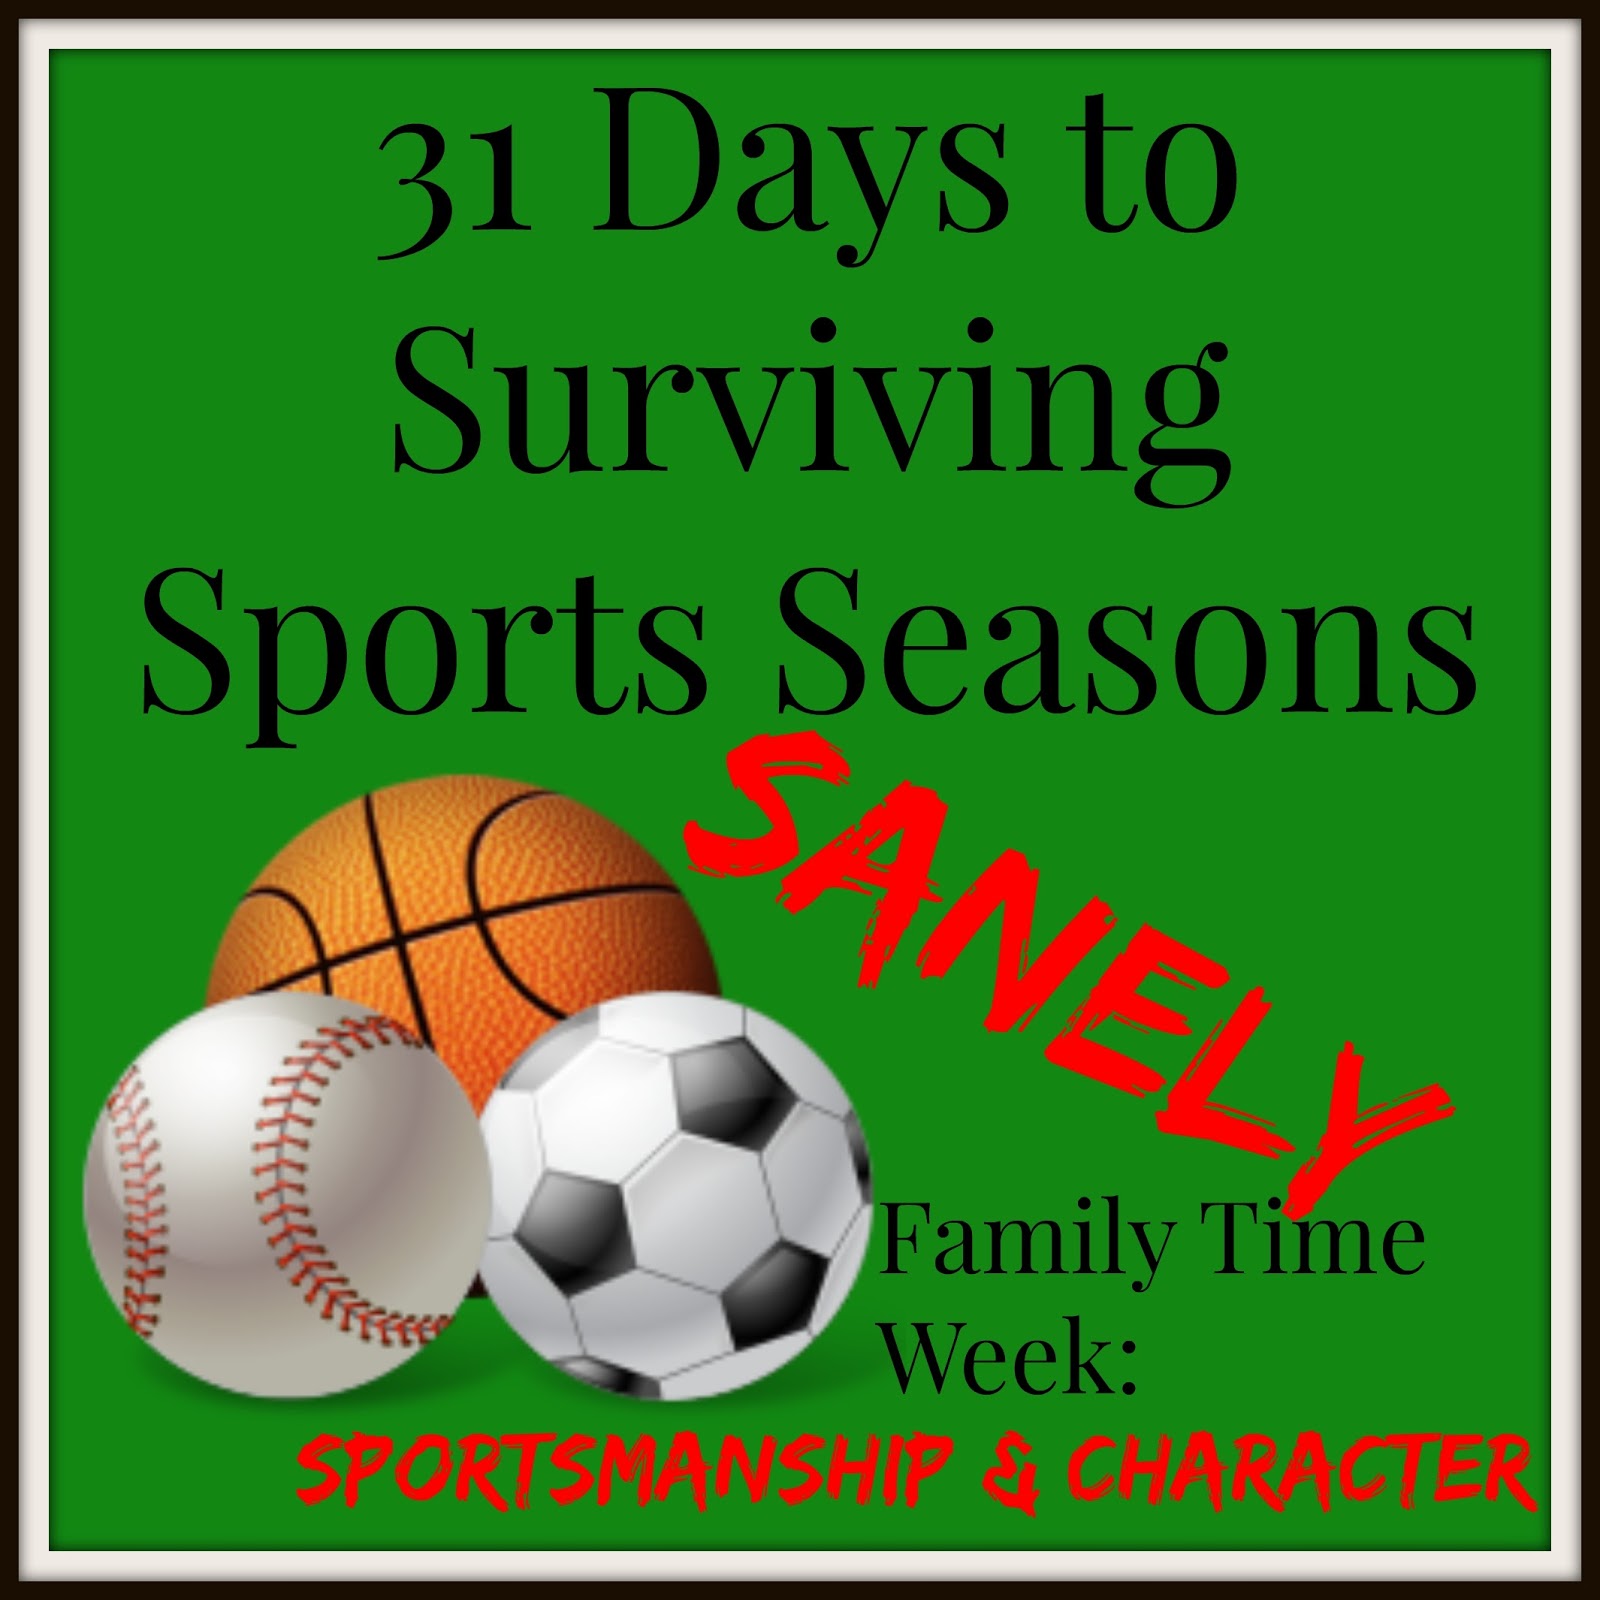 31 Days to Surviving Sports Seasons Sanely: Revel in Sportsmanship and Character